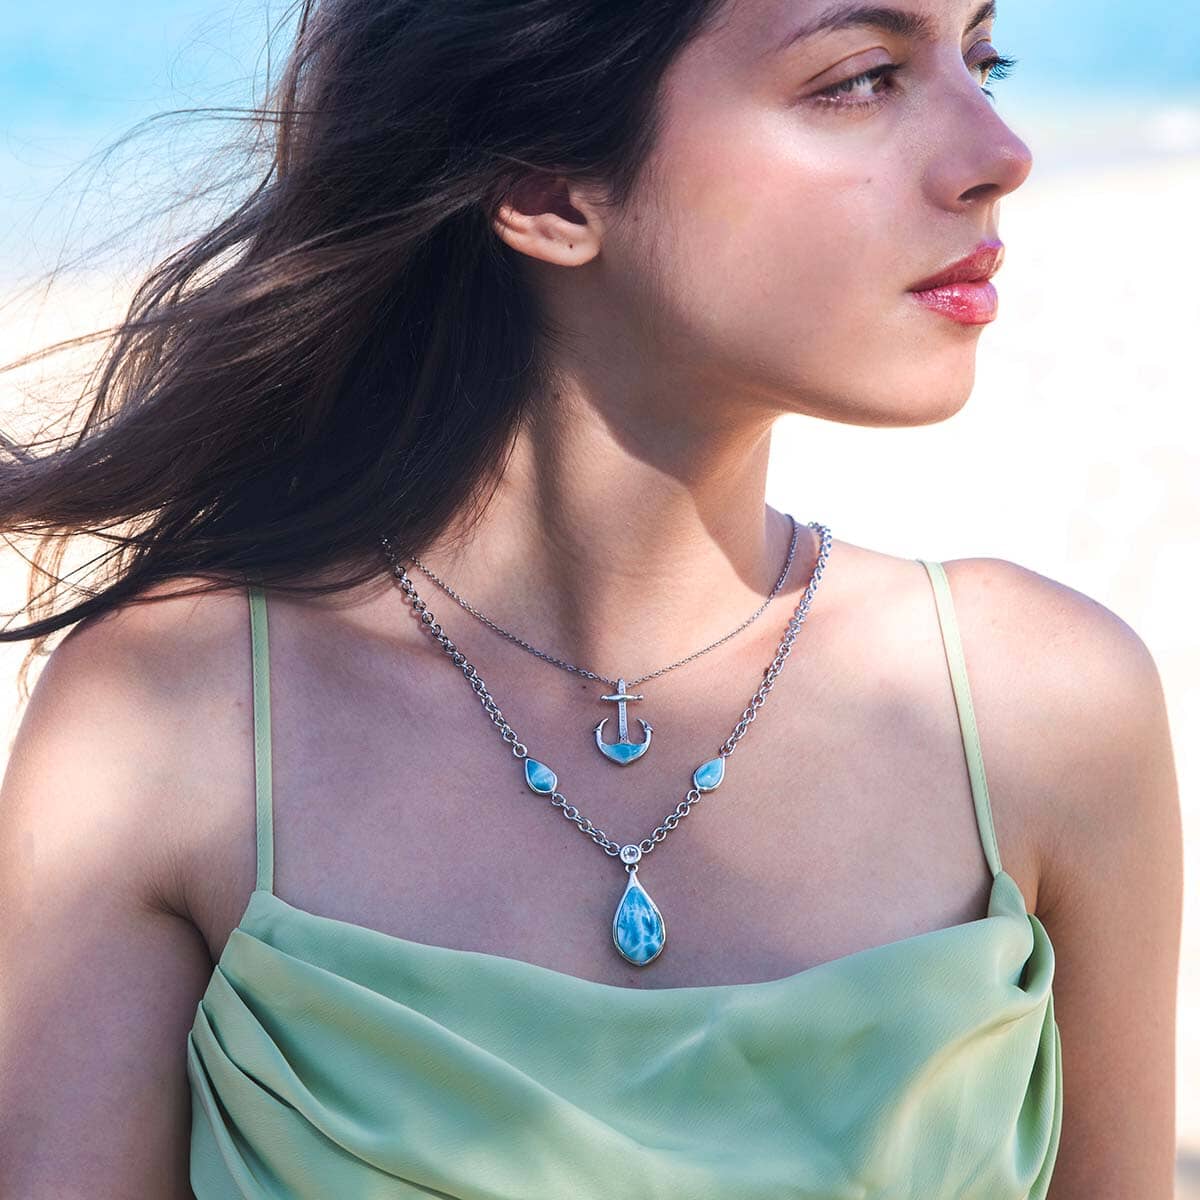 The art of layering necklaces featuring larimar teardrop necklace and larimar anchor pendant